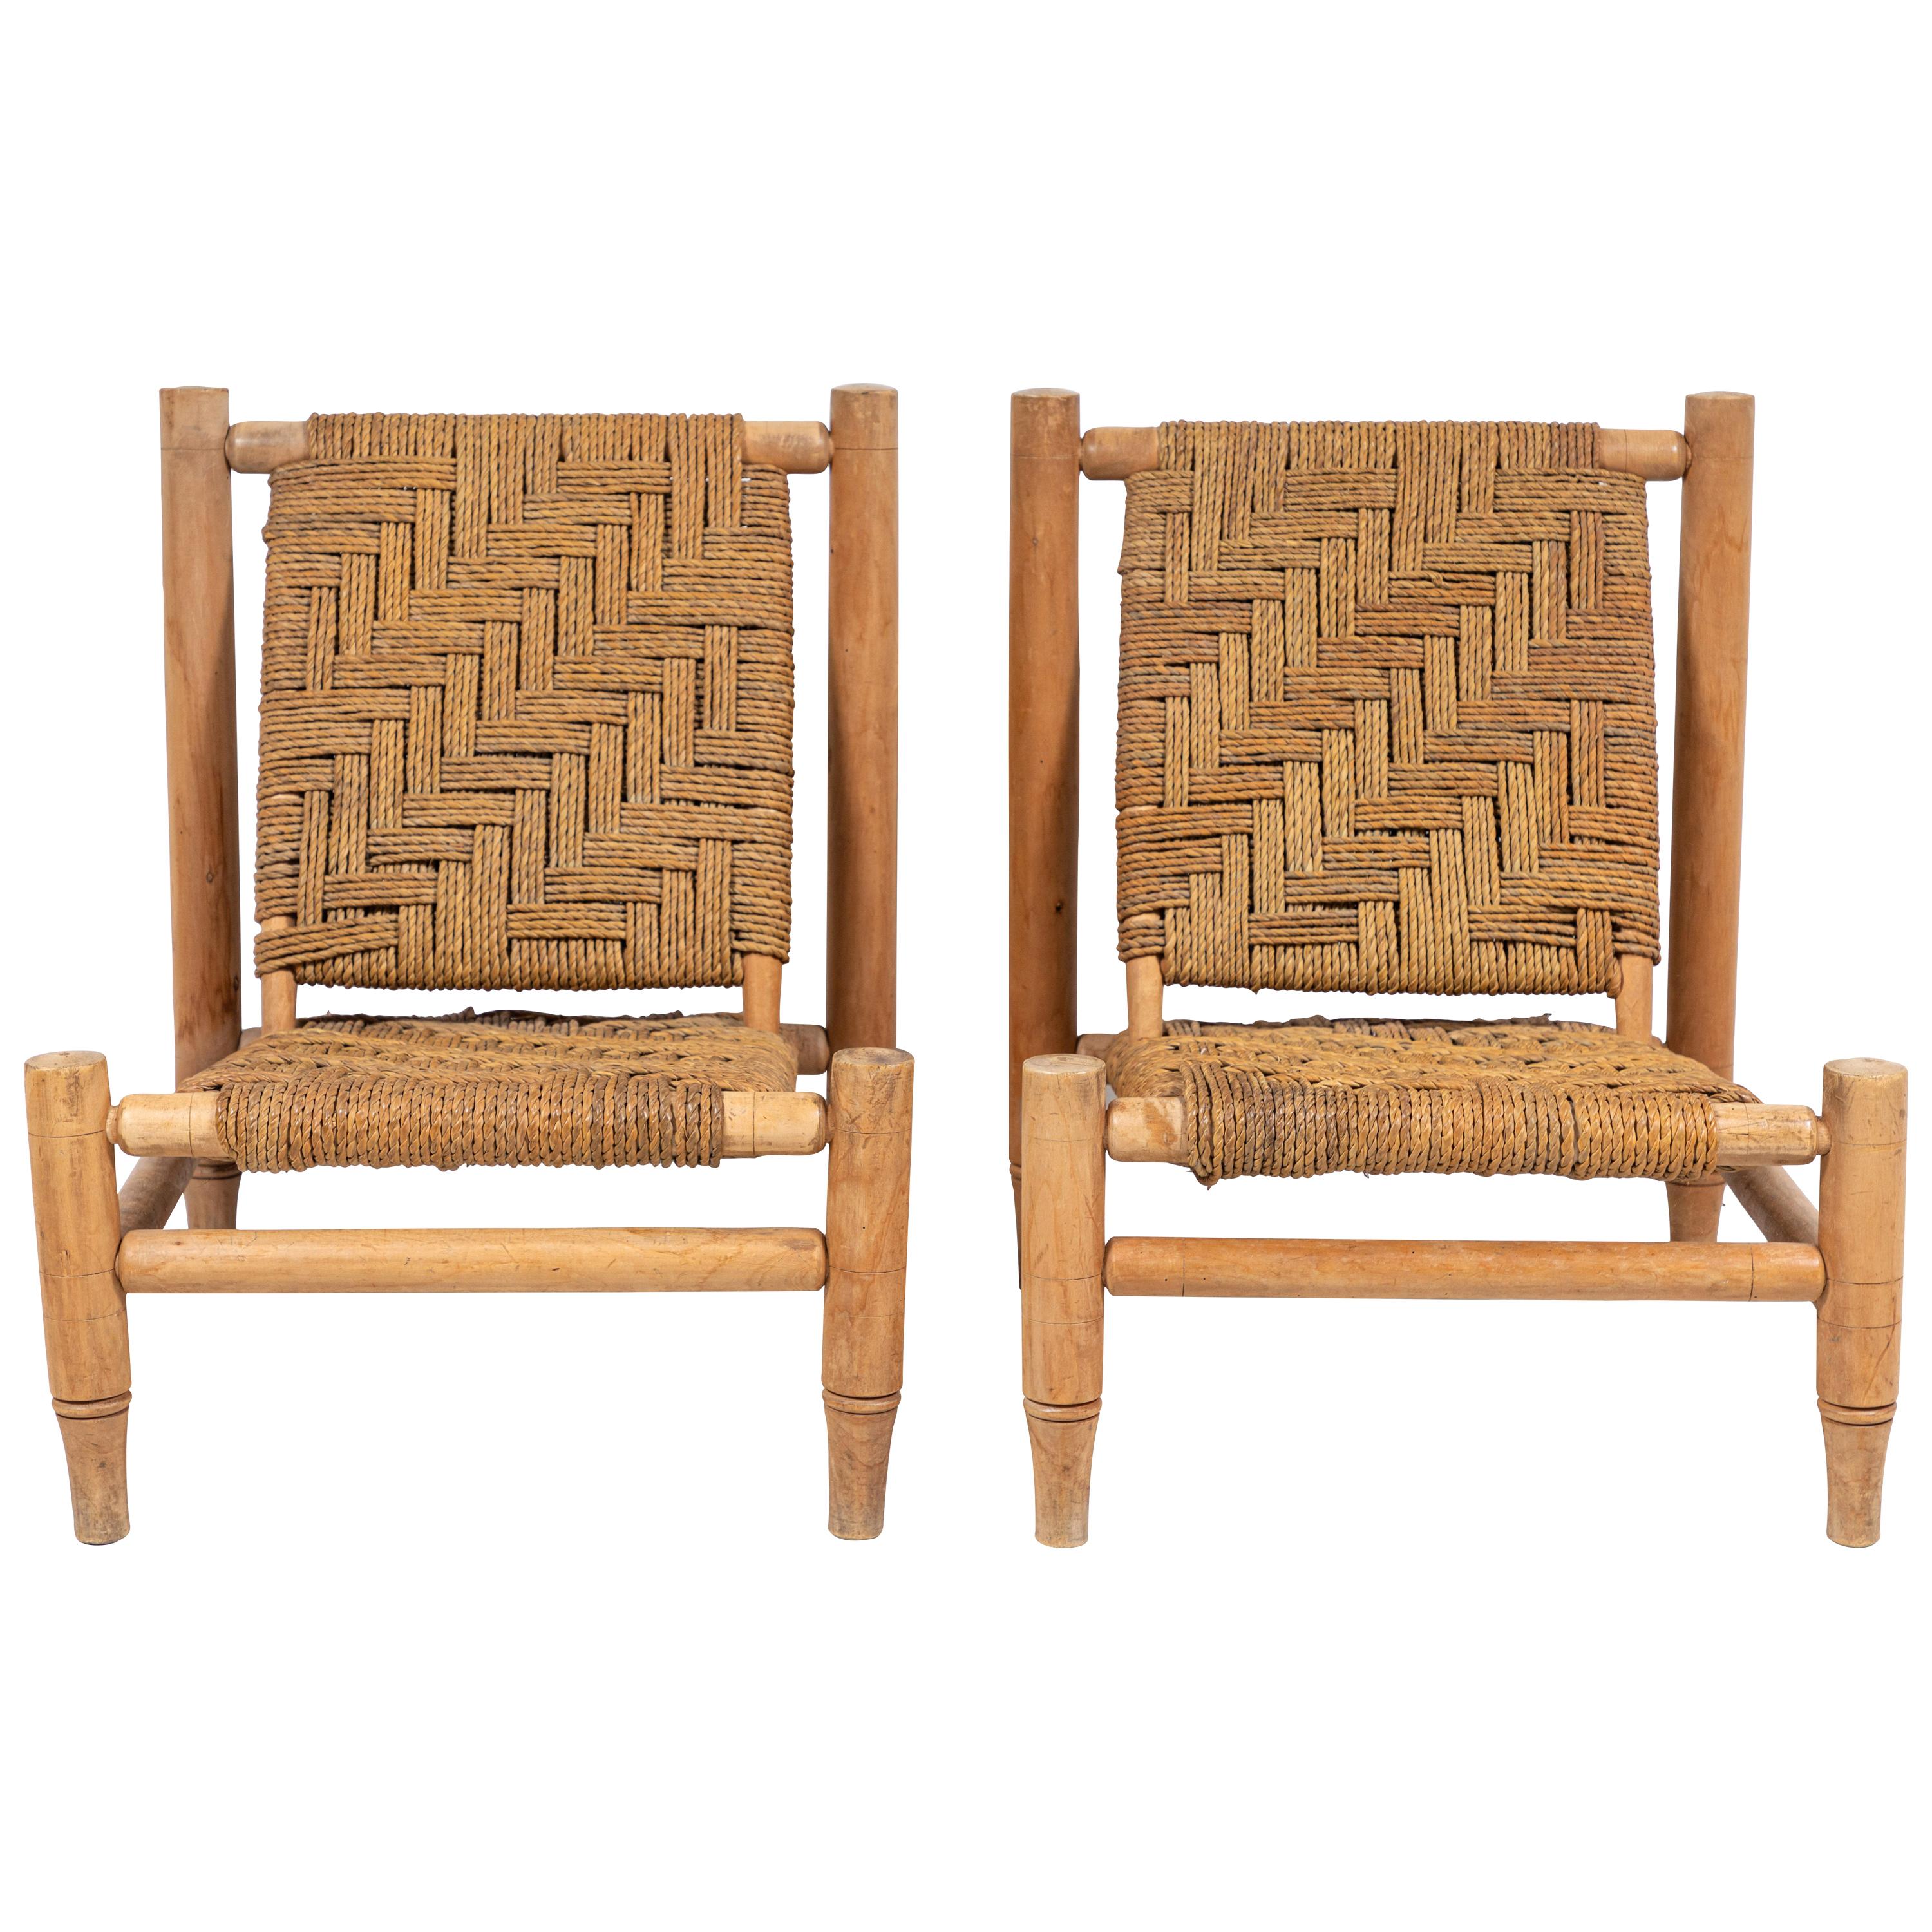 Pair of Adrien Audoux & Frida Minet Rope Chairs